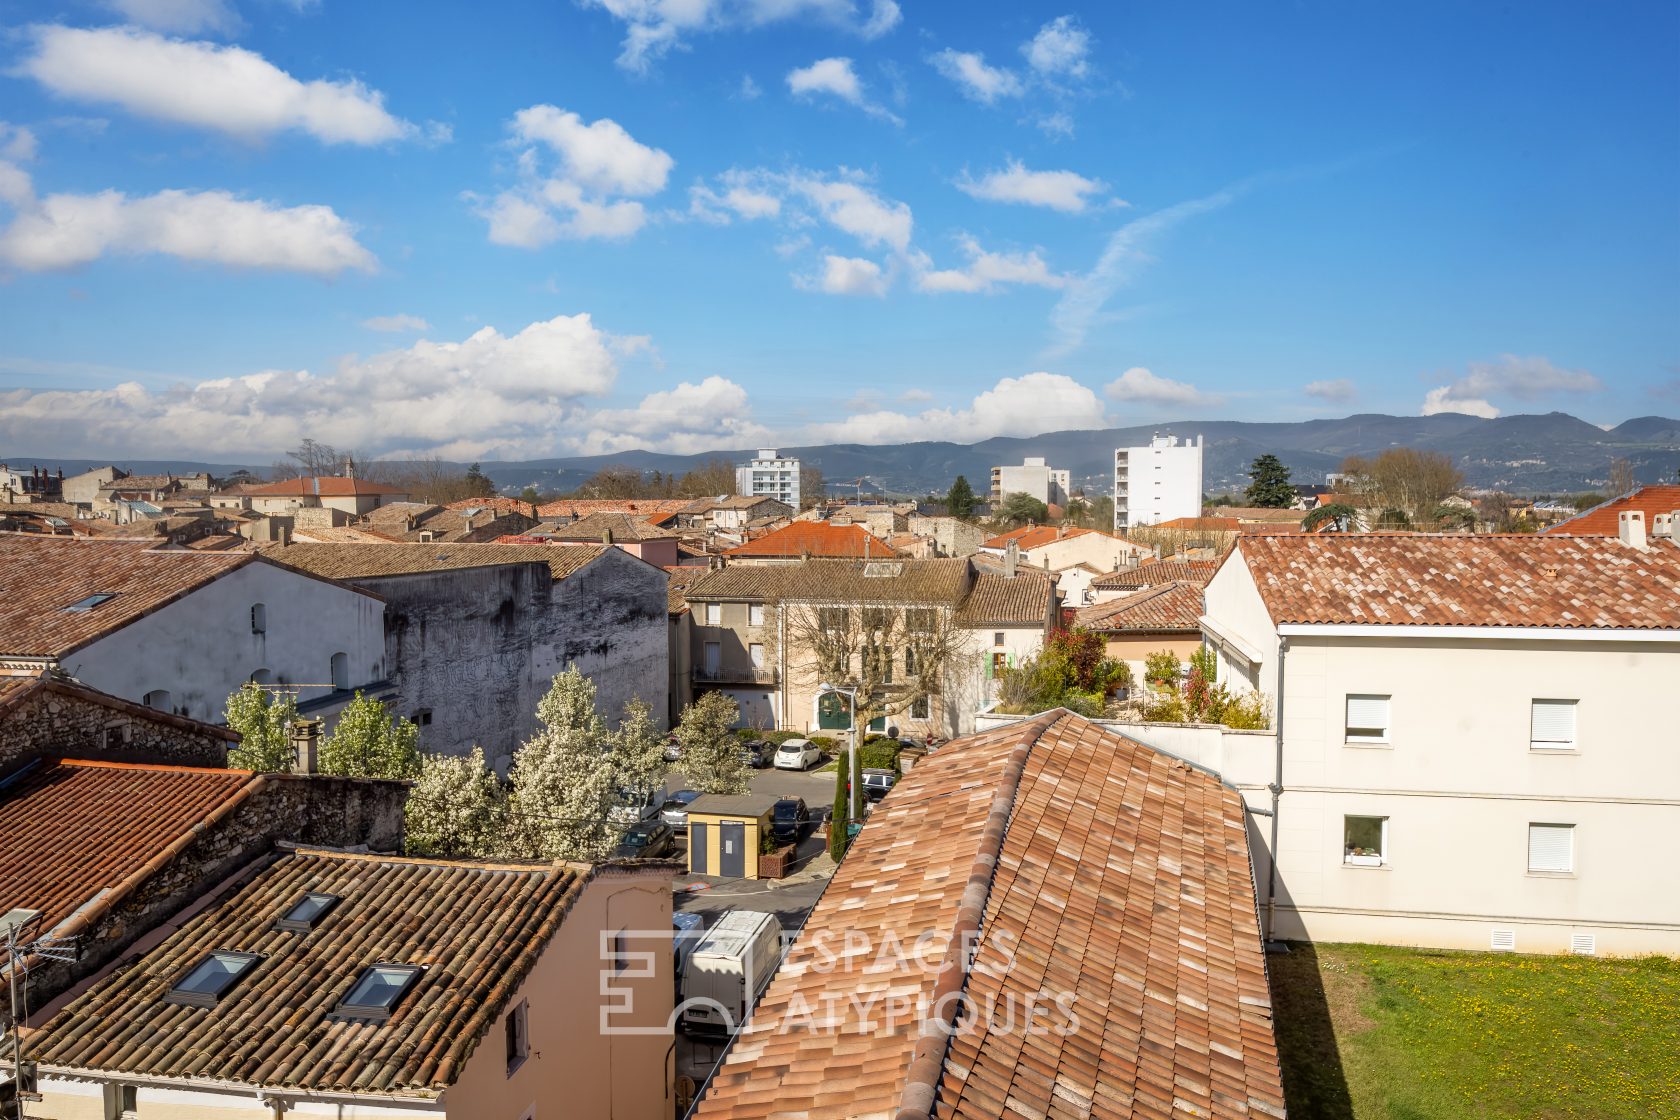 Flat with terrace and winter garden above the roofs of Montelimar